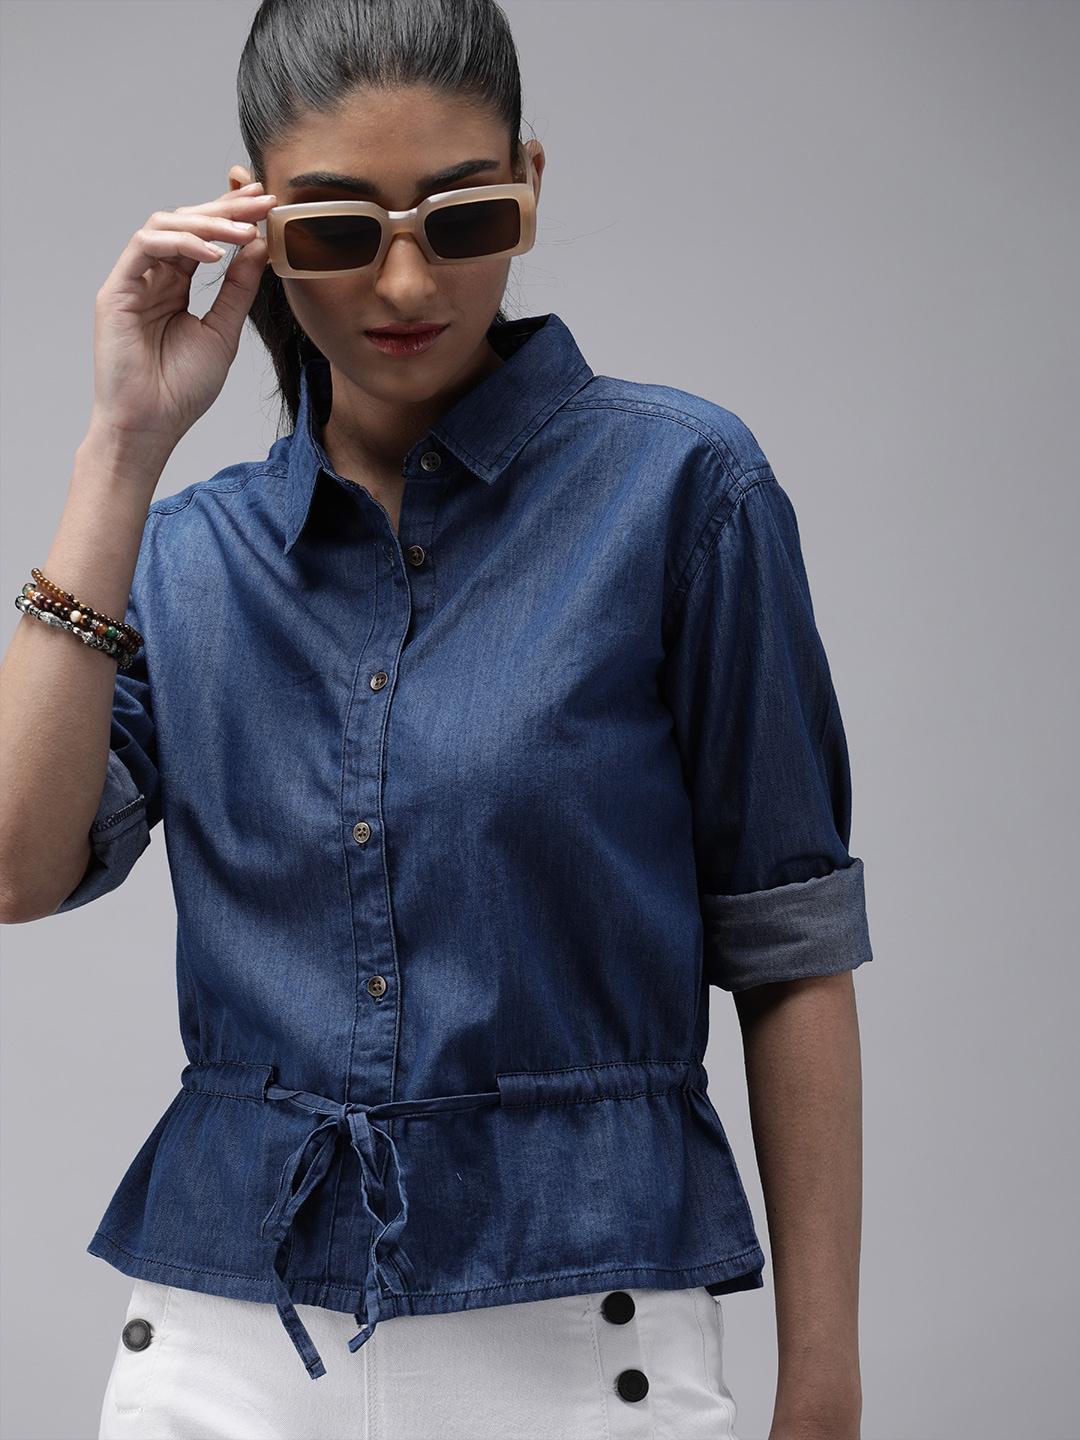 the roadster lifestyle co women blue denim pure cotton shirt style top